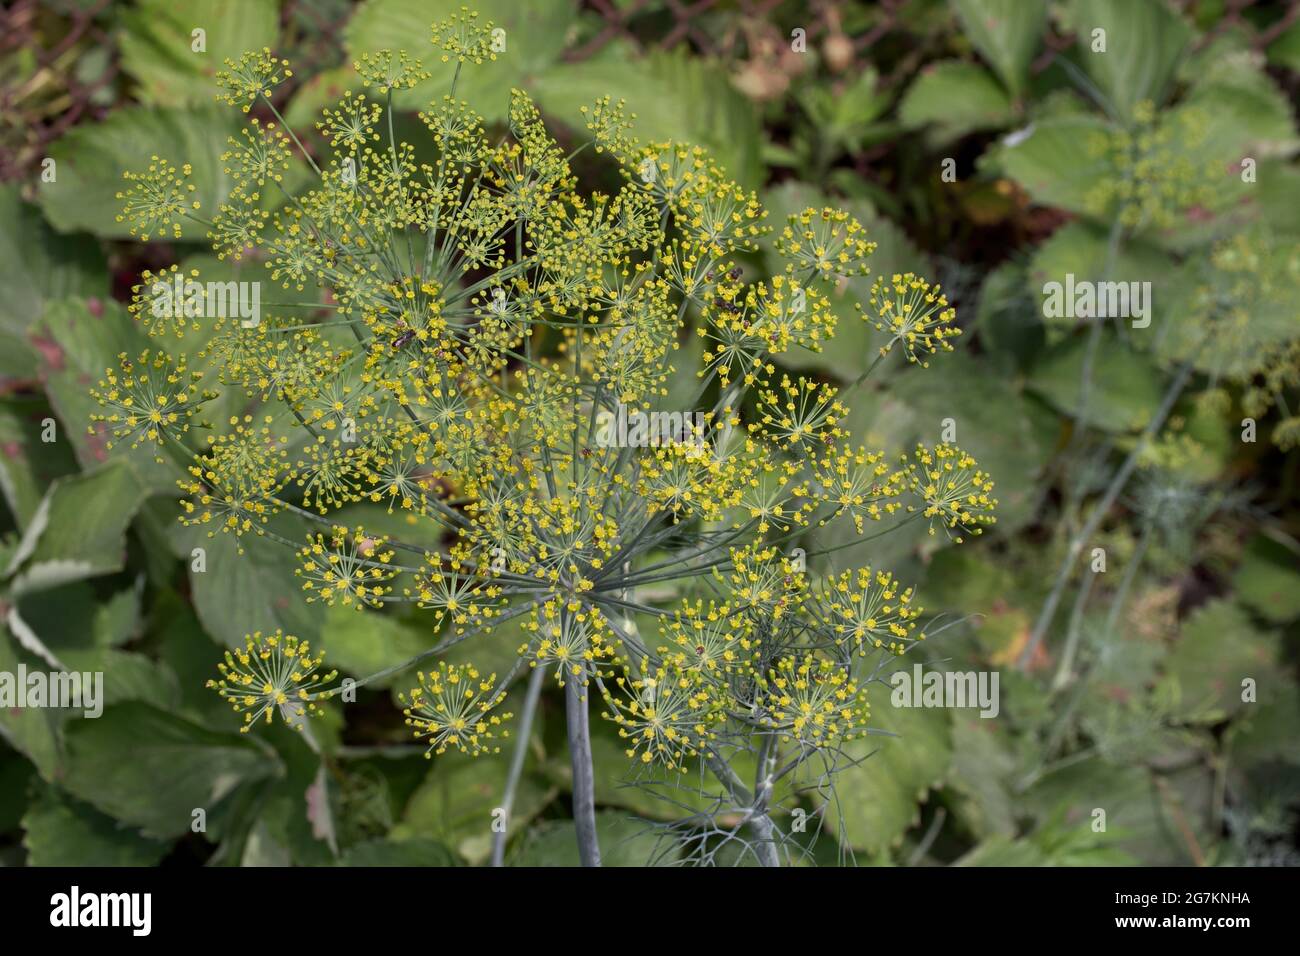 Dill (Anethum graveolens) is an annual herb in the celery family Apiaceae. It is the only species in the genus Anethum. Dill flowers, close-up. Stock Photo